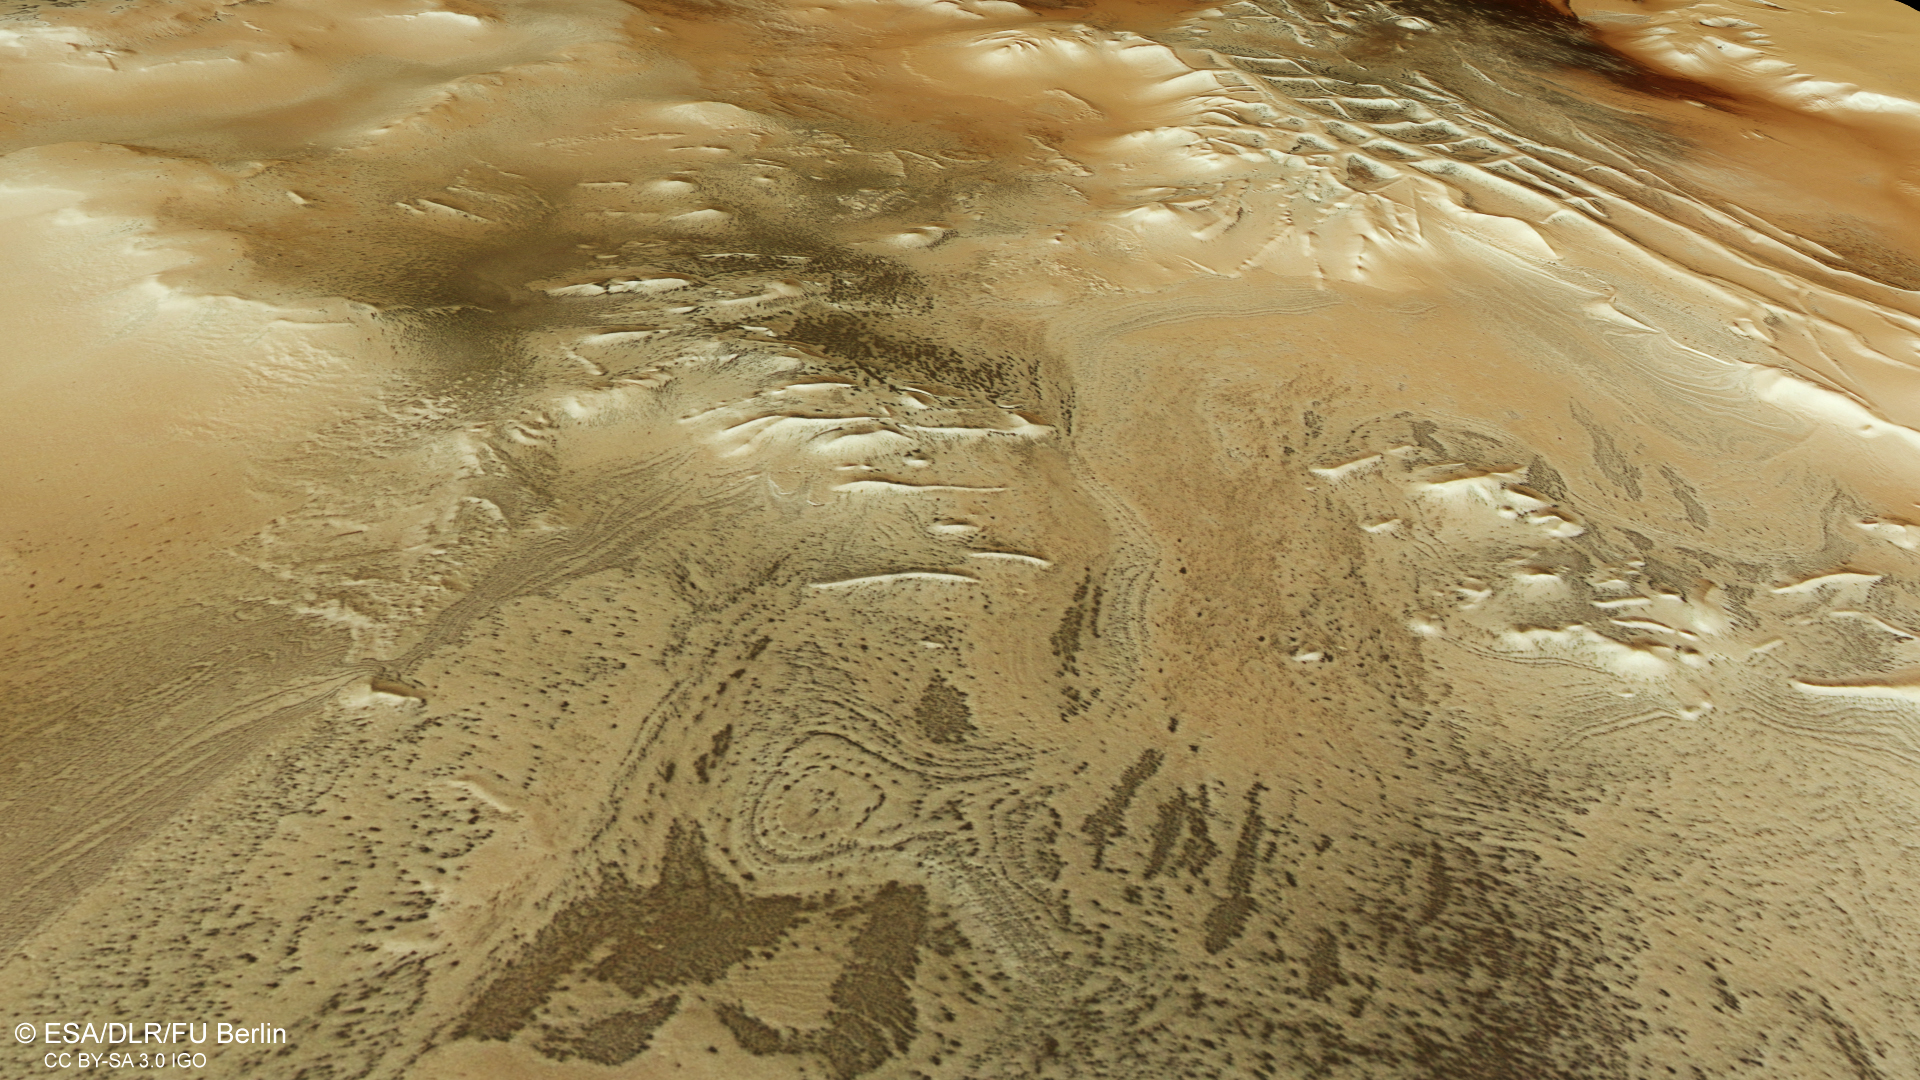 This rectangular image shows part of the martian surface as if the viewer is looking down and across the landscape, with the irregular, mottled ground appearing in swirled tones of brown and tan.